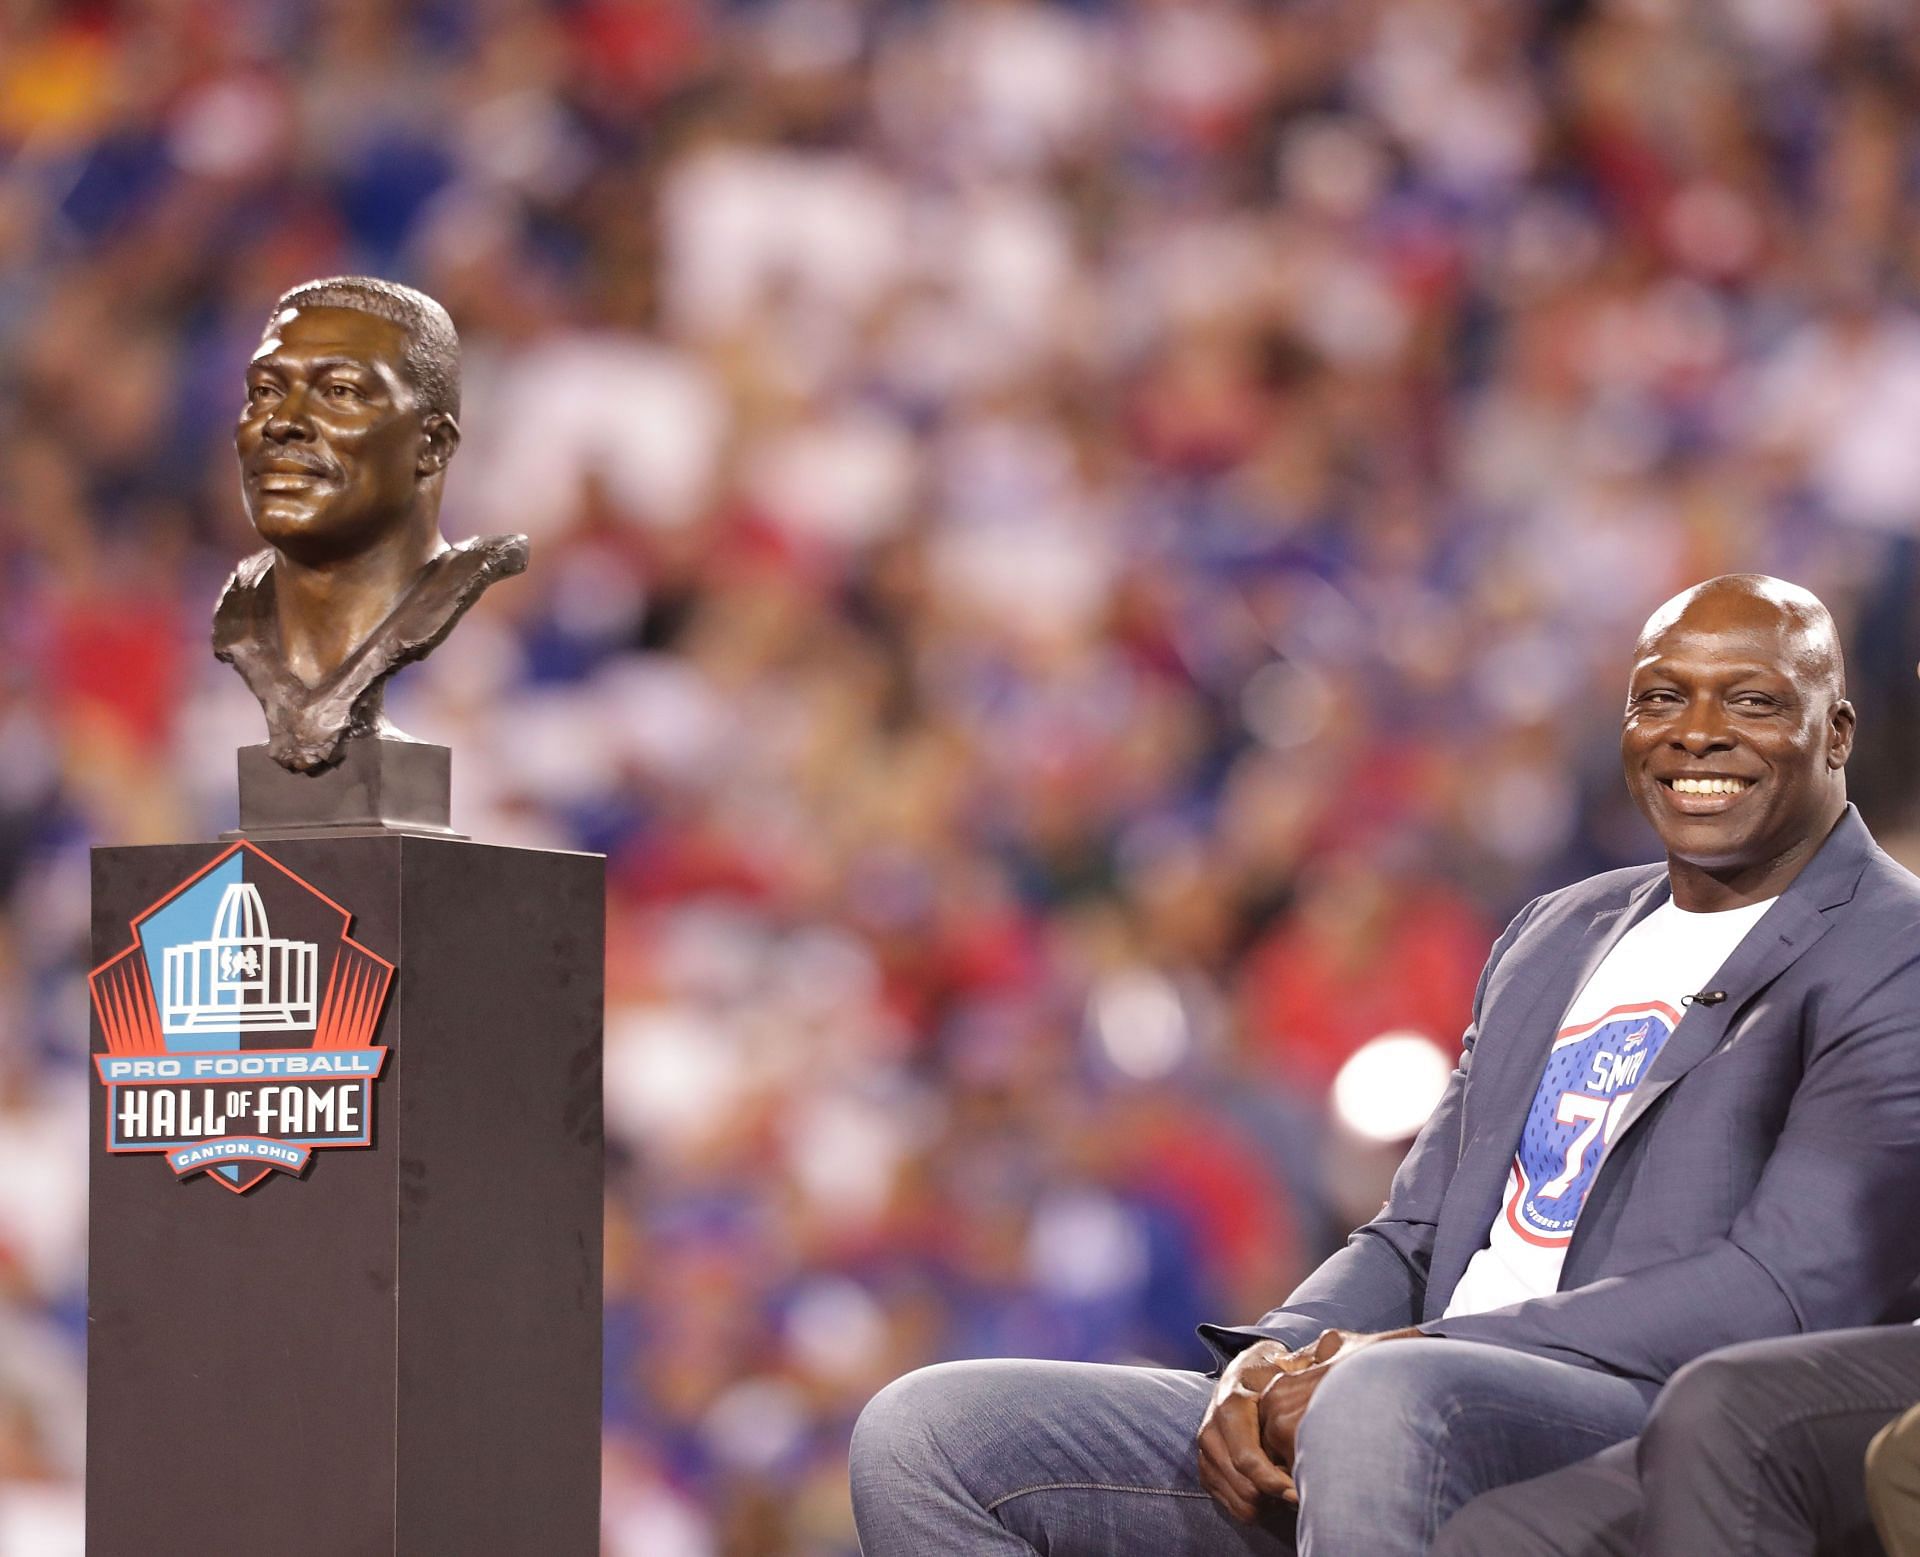 Hall of Famer Bruce Smith is pictured with his statue during halftime in a game between Buffalo Bills and New York Jet